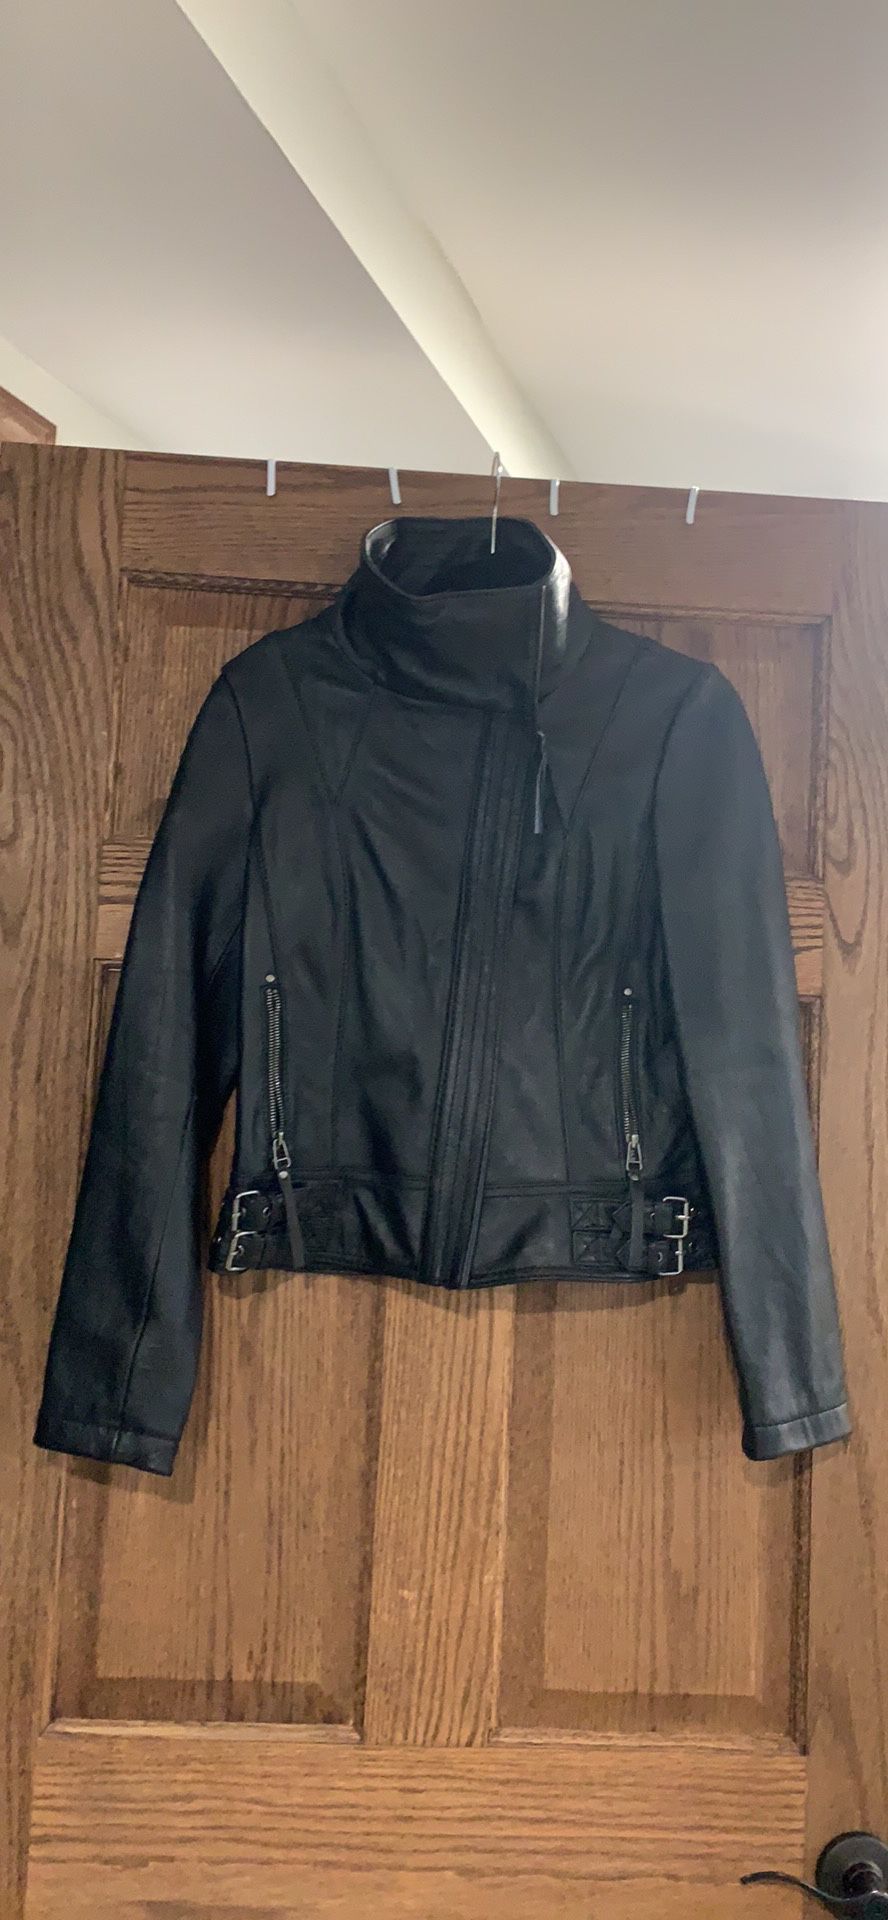 Very Nice MK Leather Jacket Size Small $55